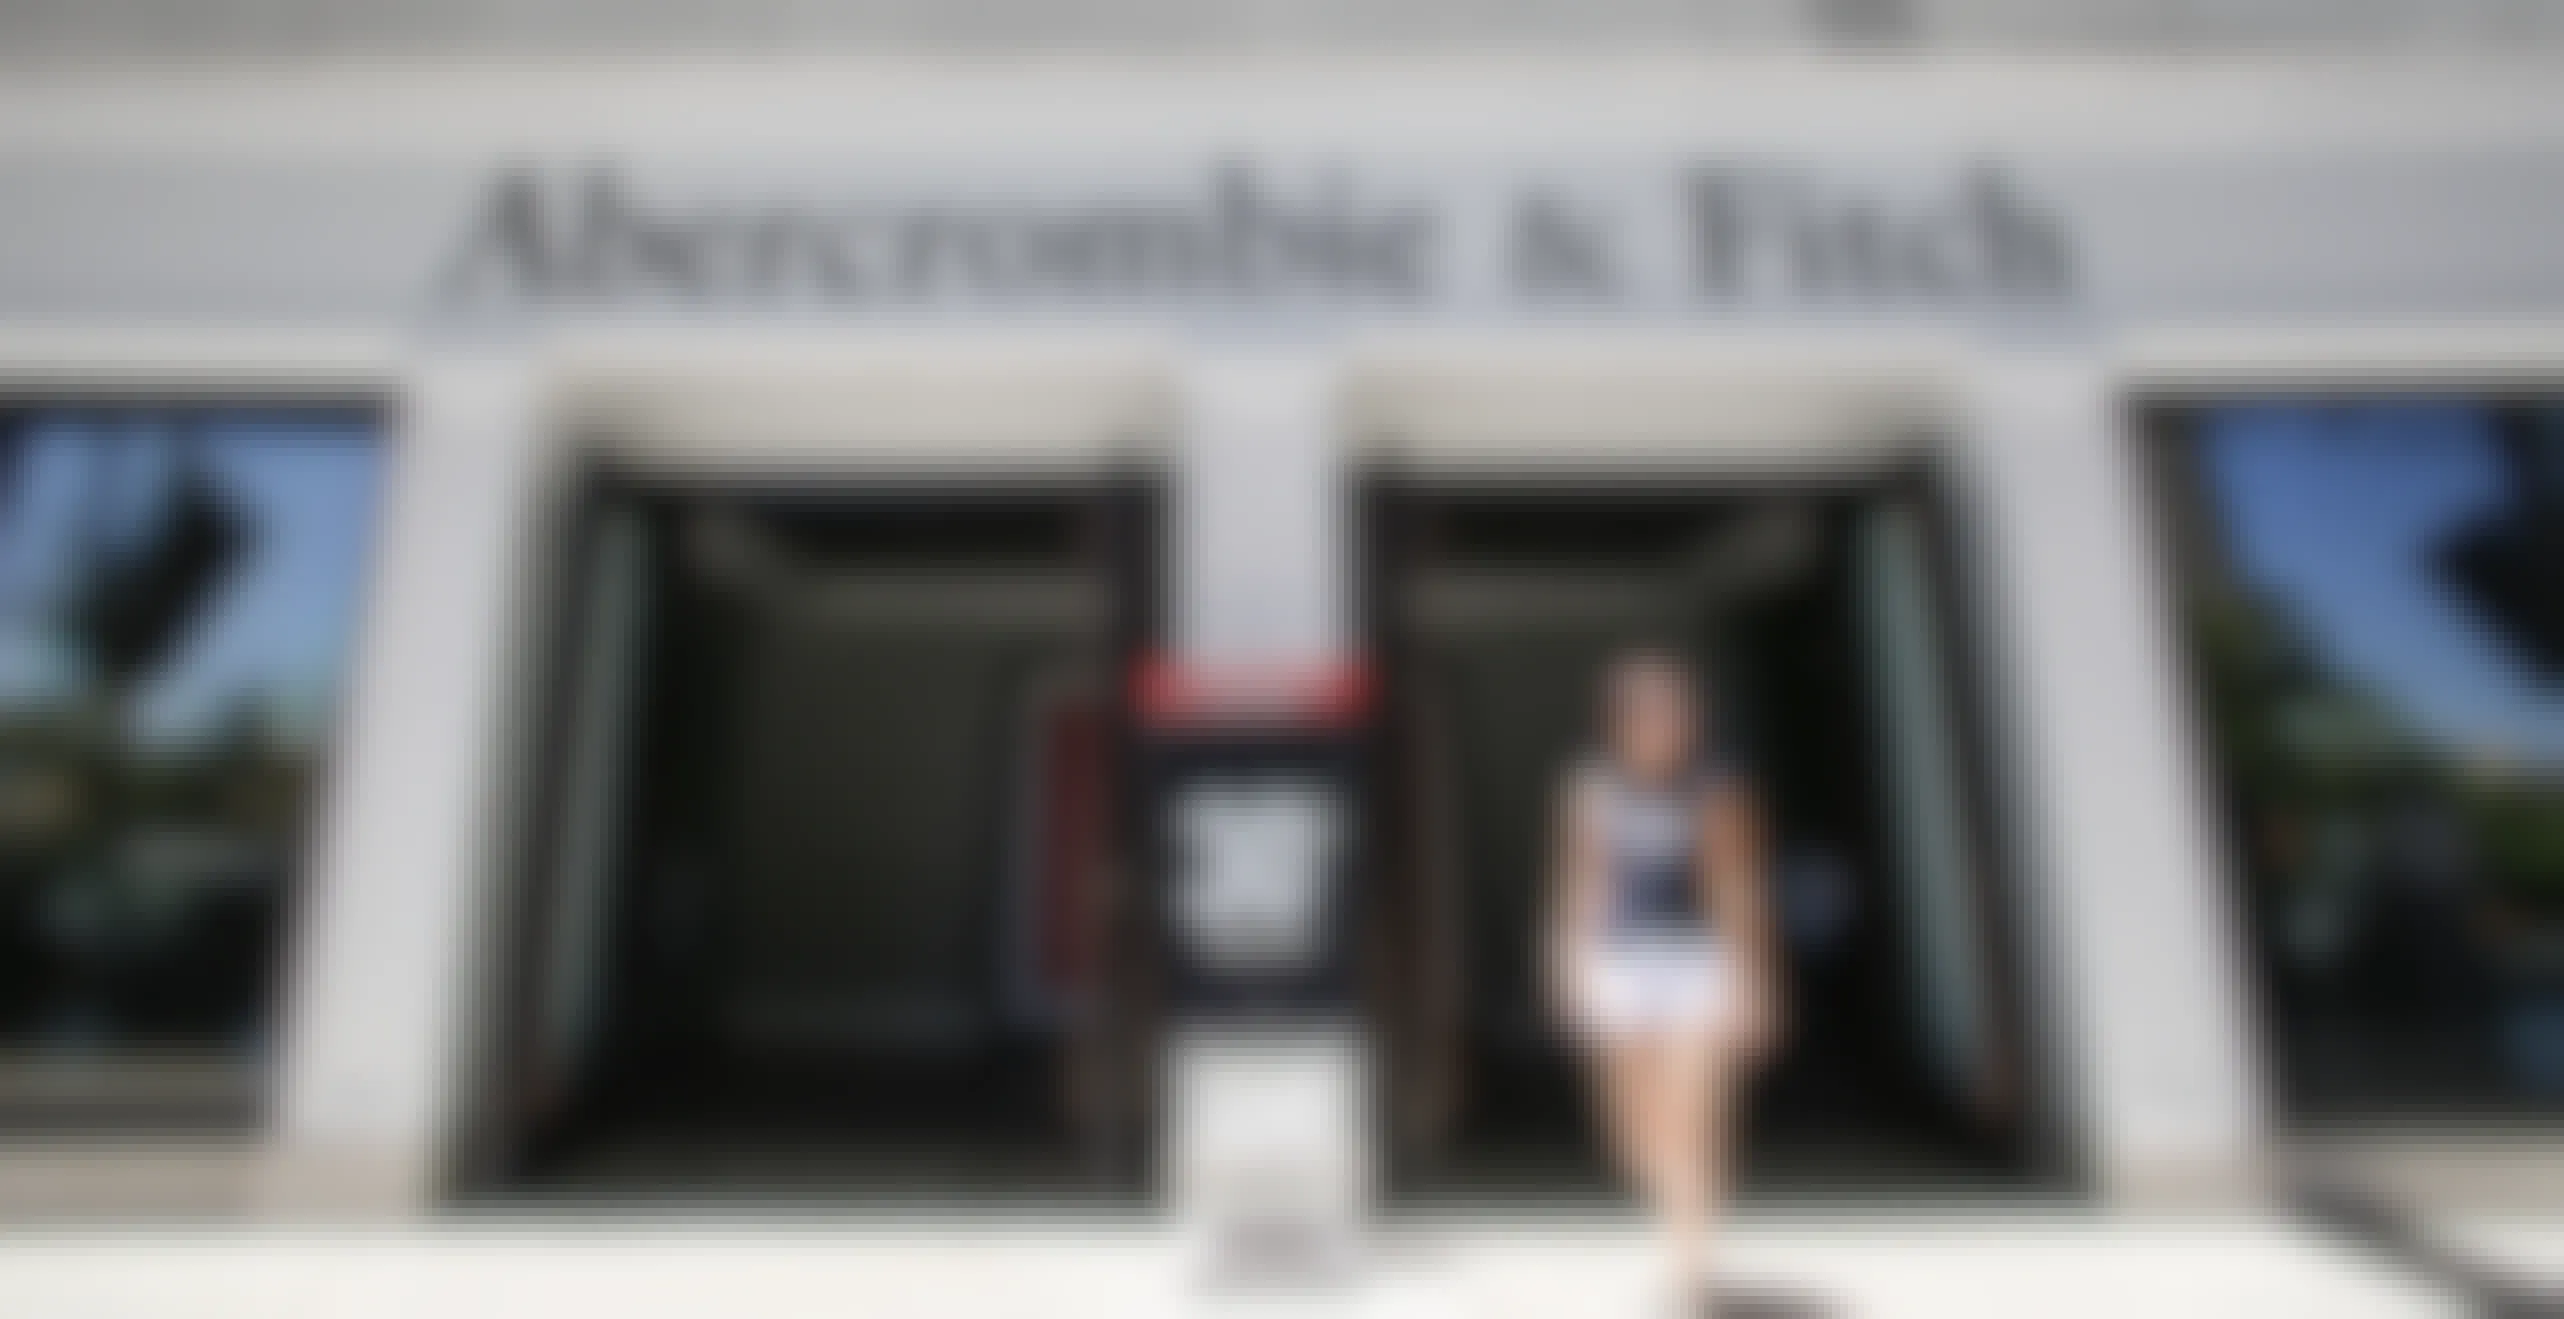 Abercrombie Return Policy: Here's How to Avoid That Pesky $7 Return Shipping Fee